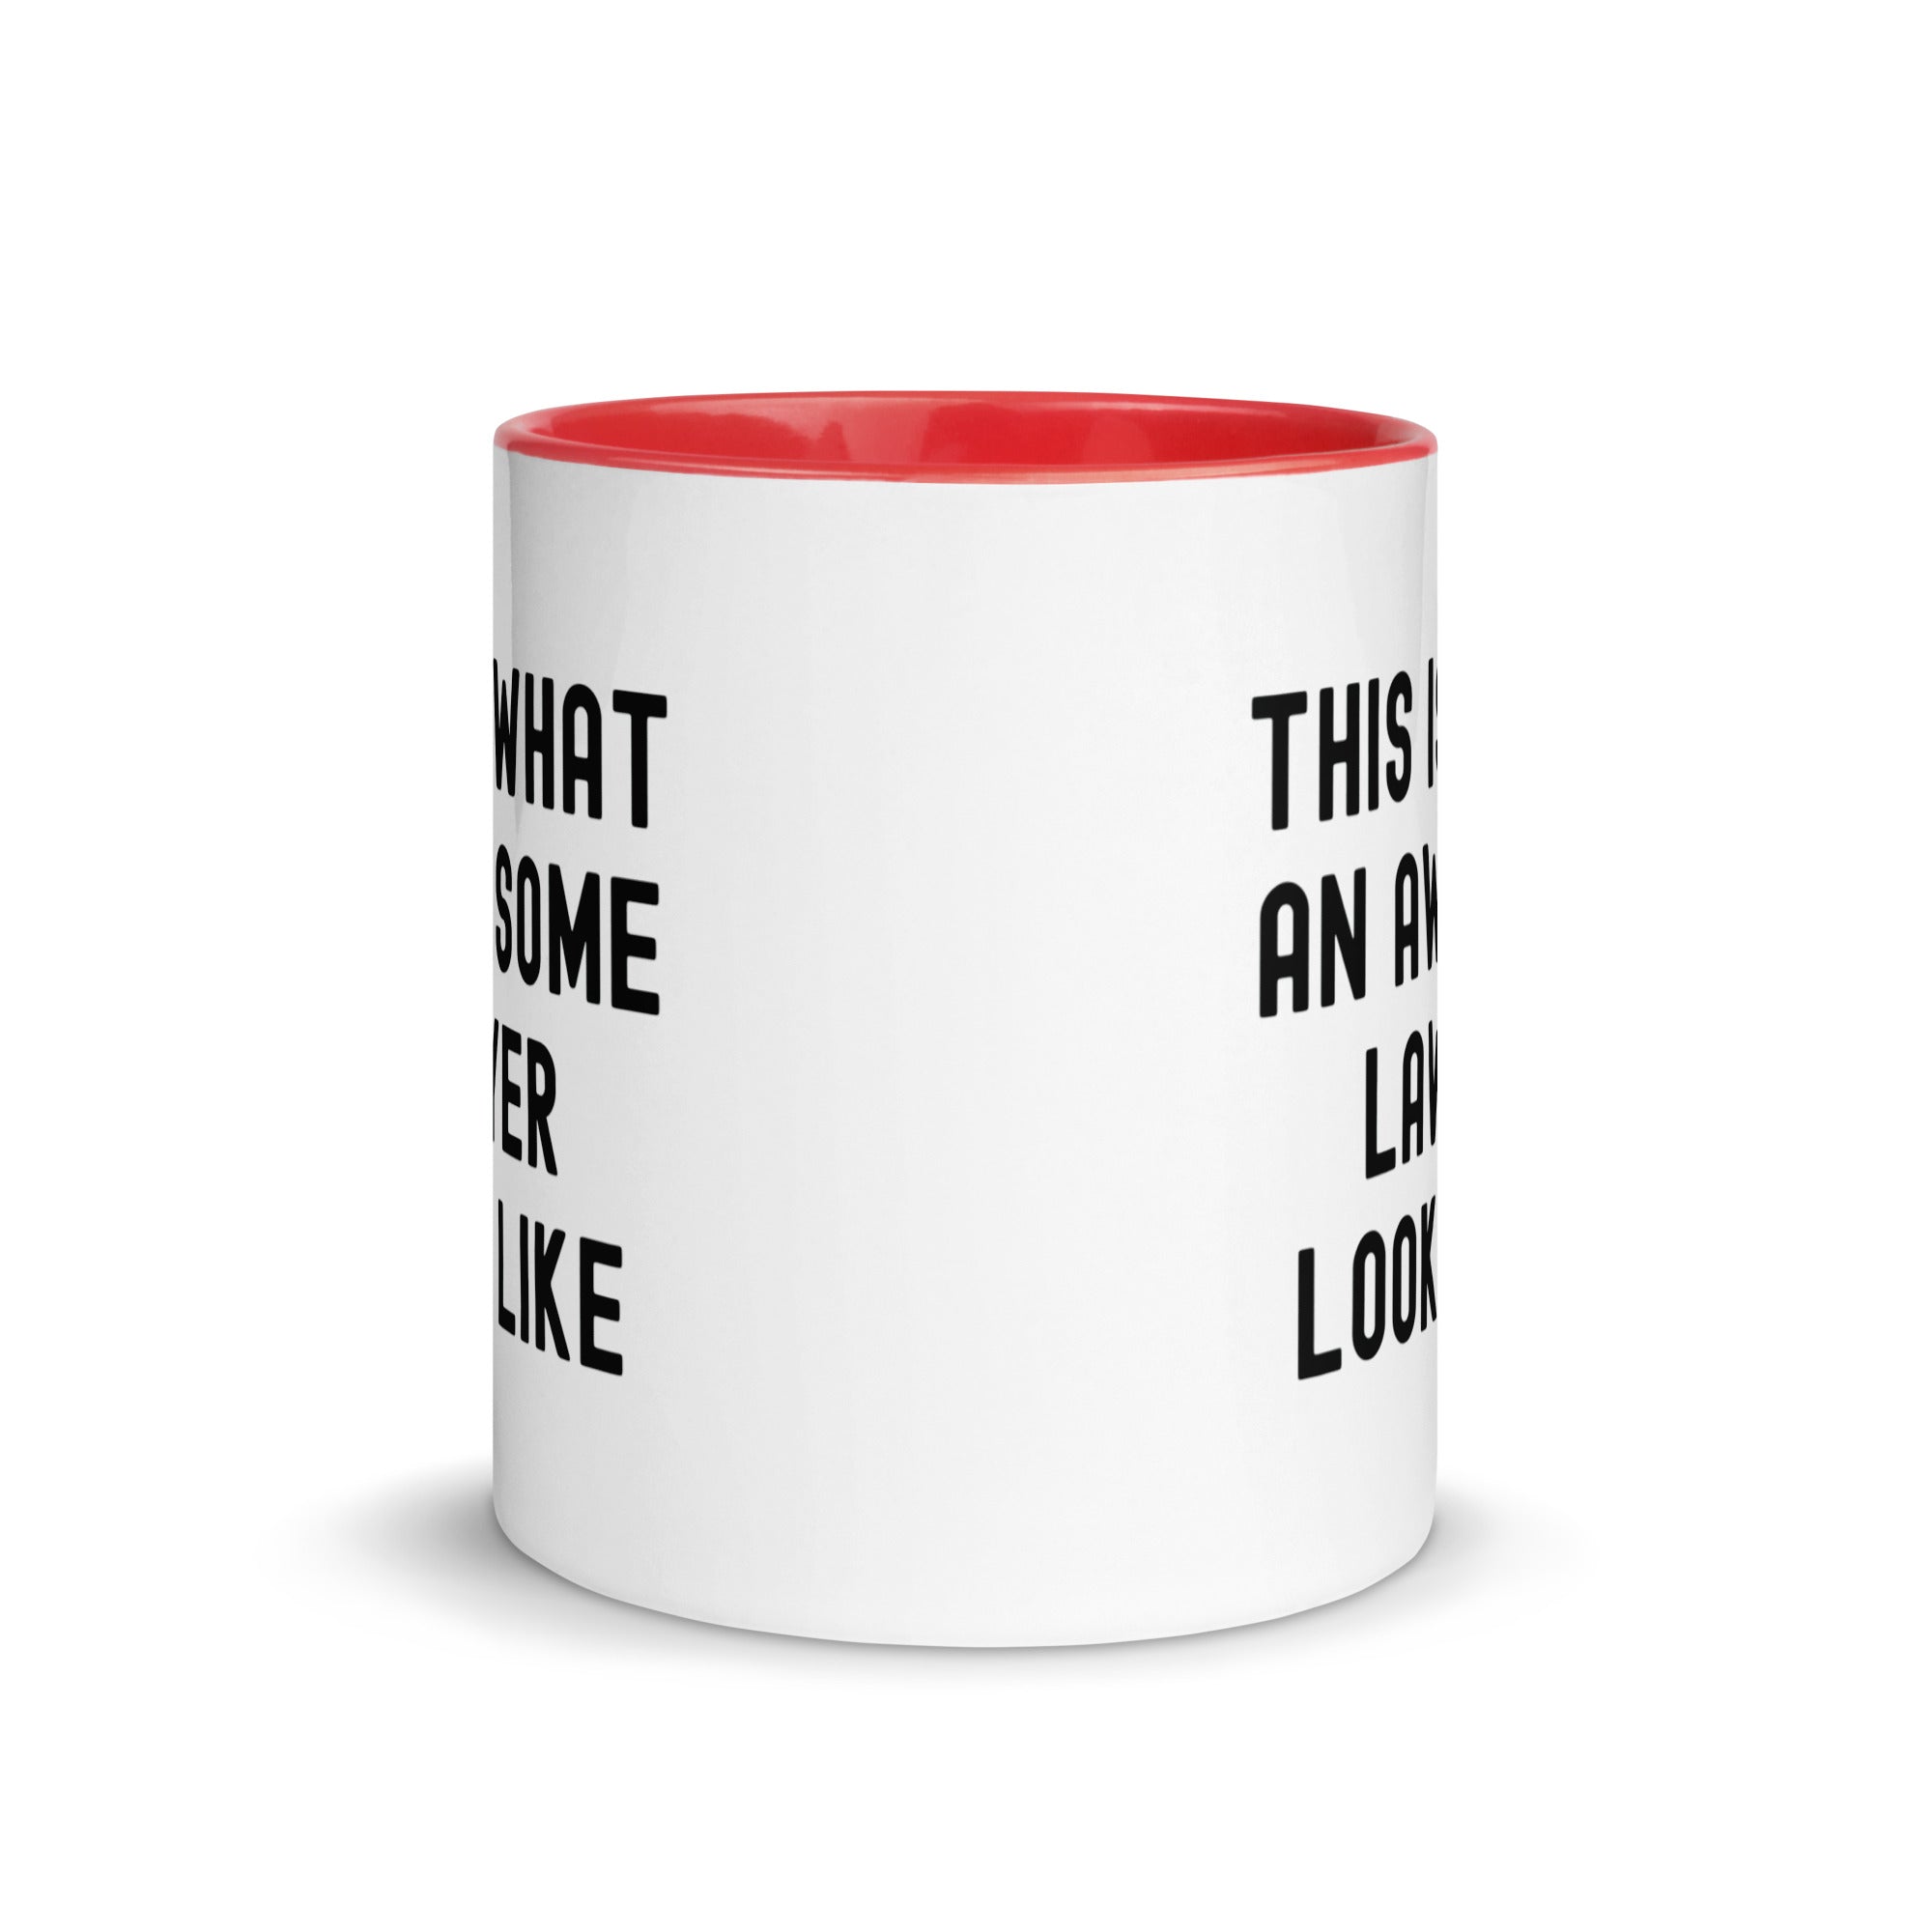 Mug with Color Inside | This is what an awesome lawyer looks like